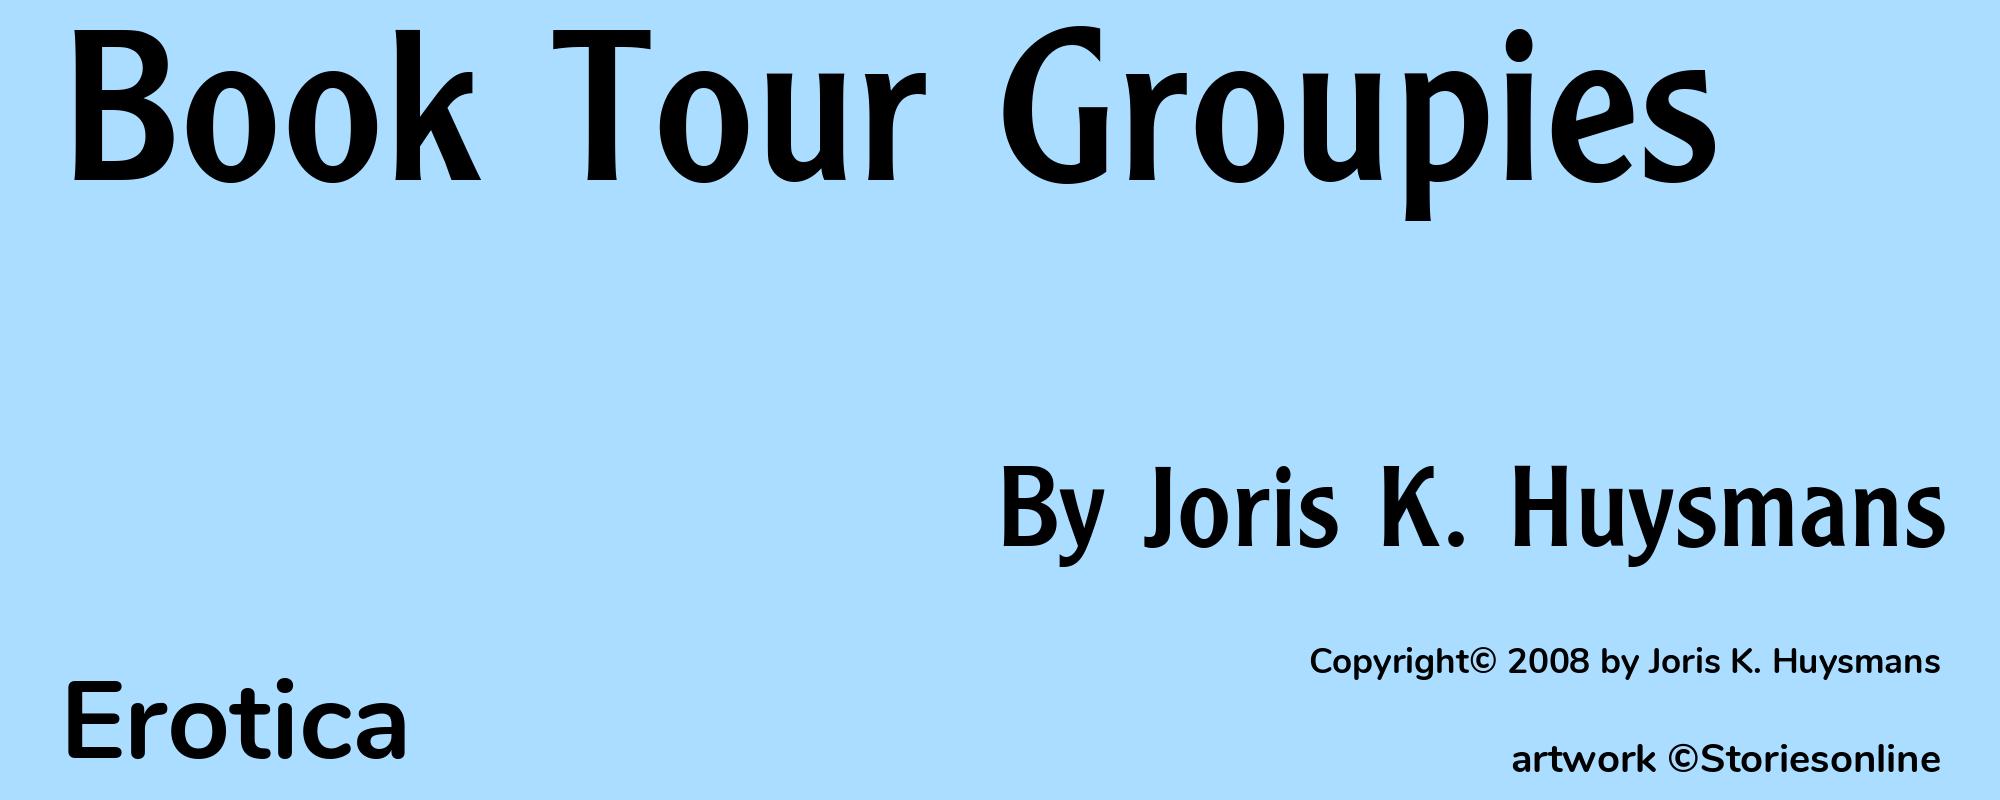 Book Tour Groupies - Cover